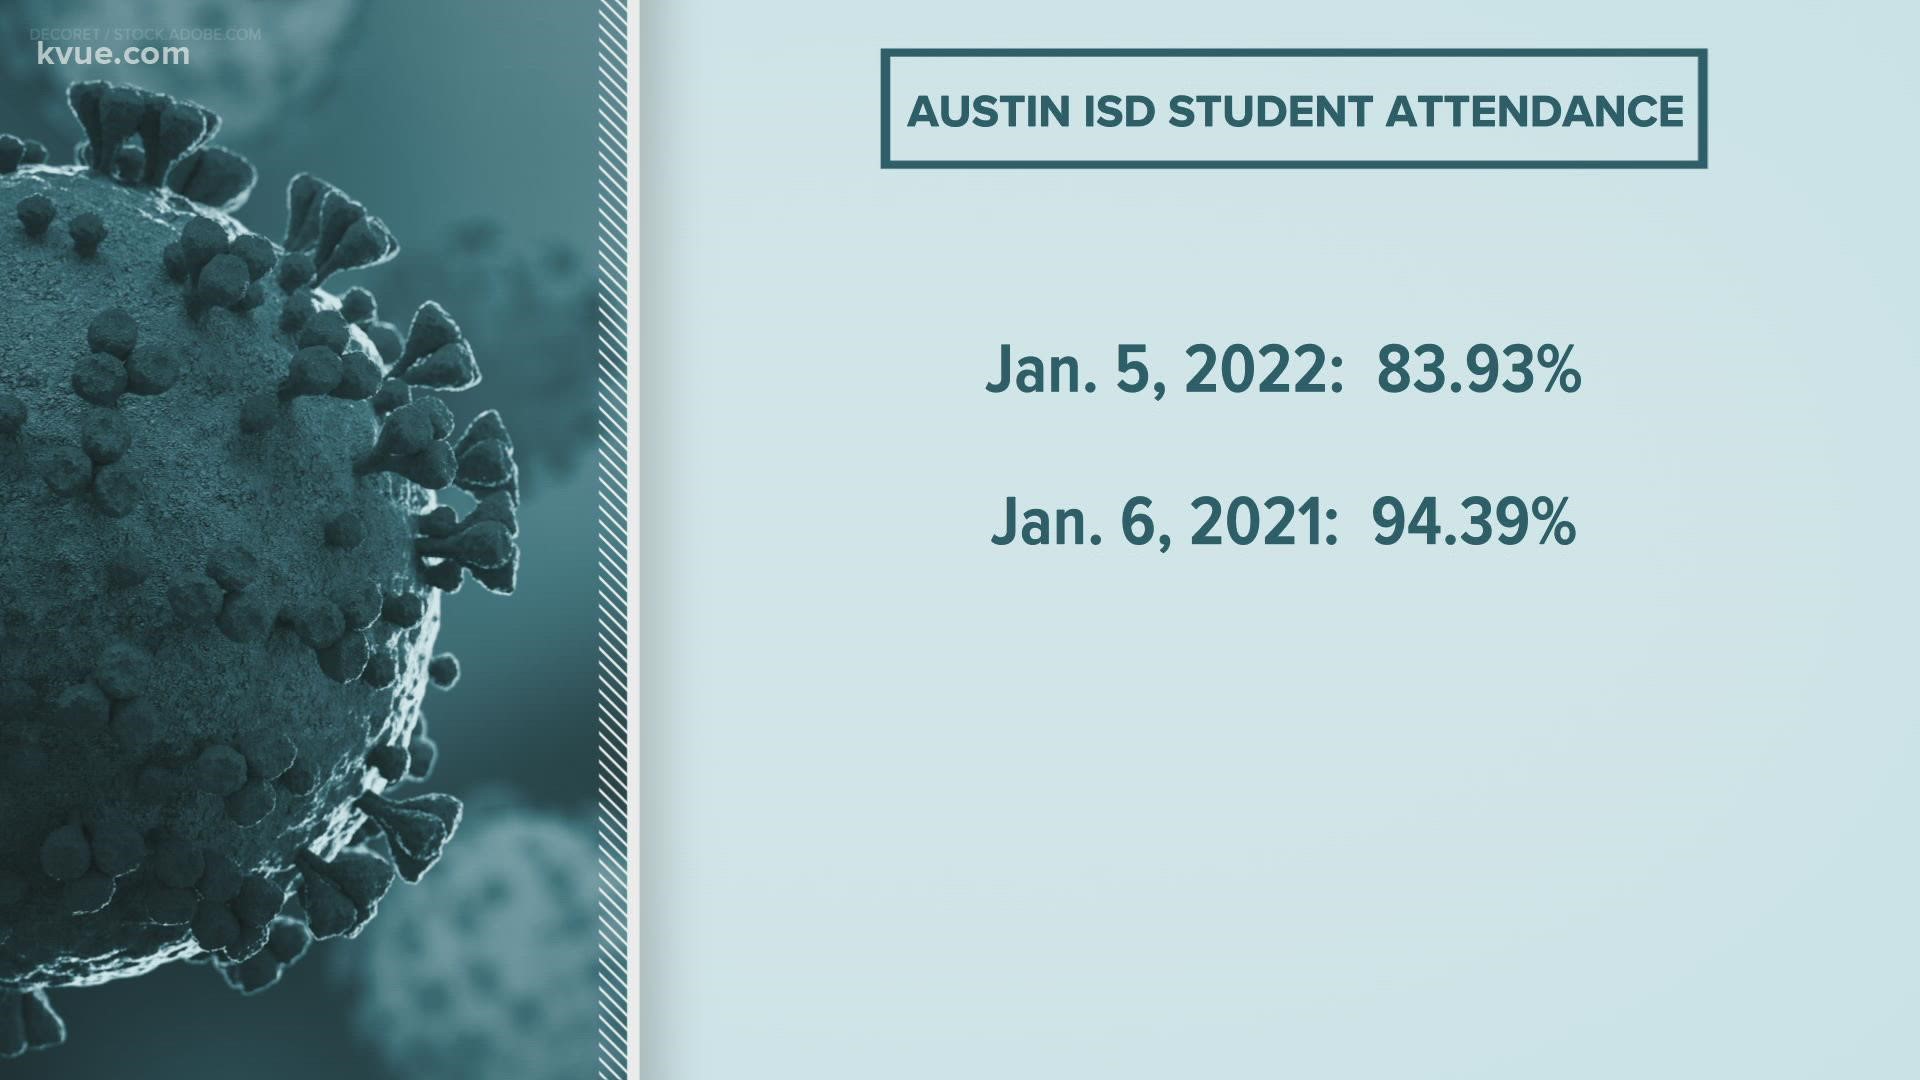 In 2021, Austin ISD had 94.39% student attendance on the first day back for the spring semester.